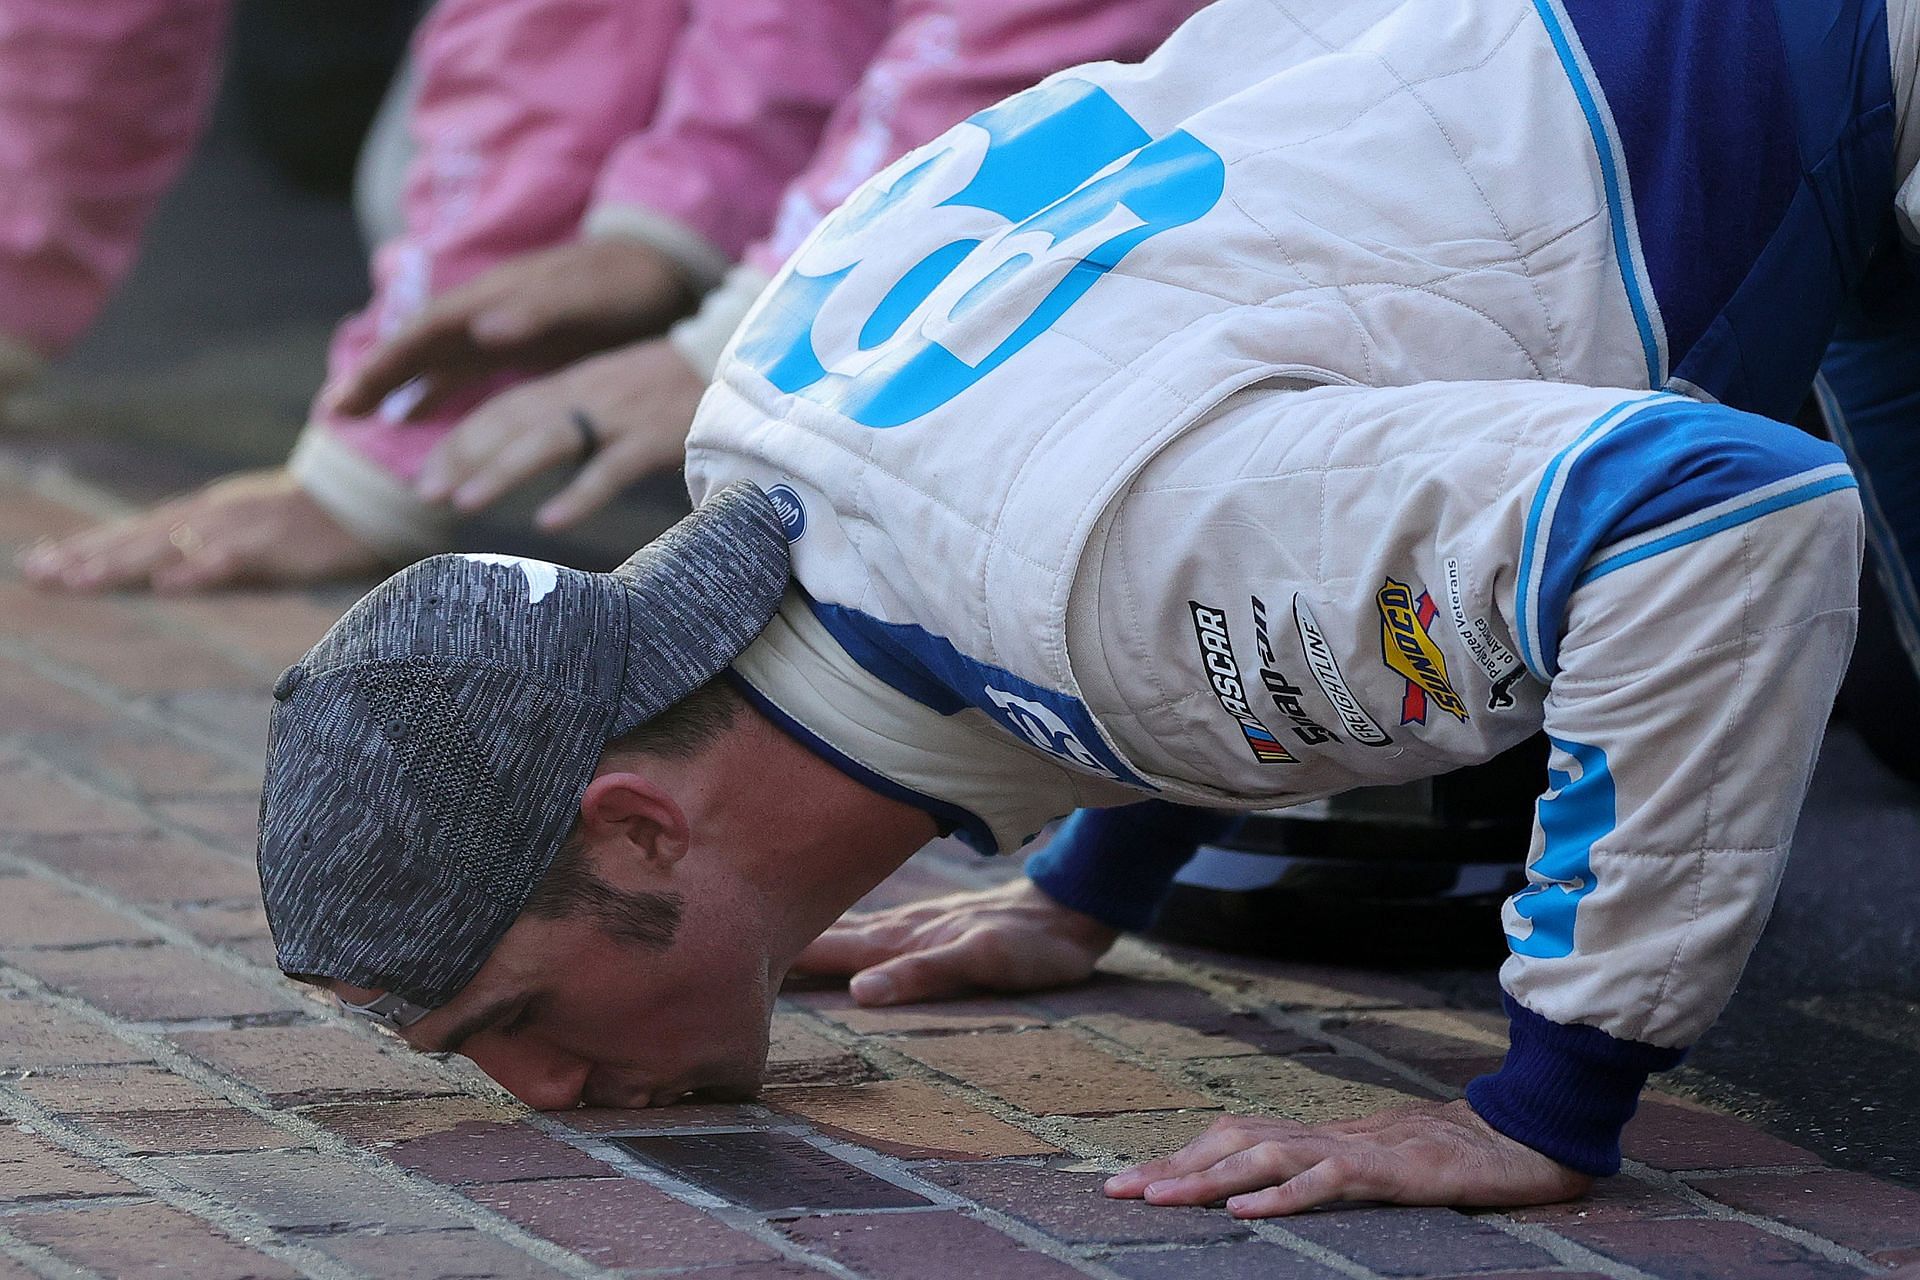 Austin Cindric kisses the yard of bricks after winning the 2021 NASCAR Xfinity Series Pennzoil 150 at the Brickyard at Indianapolis Motor Speedway in Indianapolis, Indiana (Photo by Stacy Revere/Getty Images)